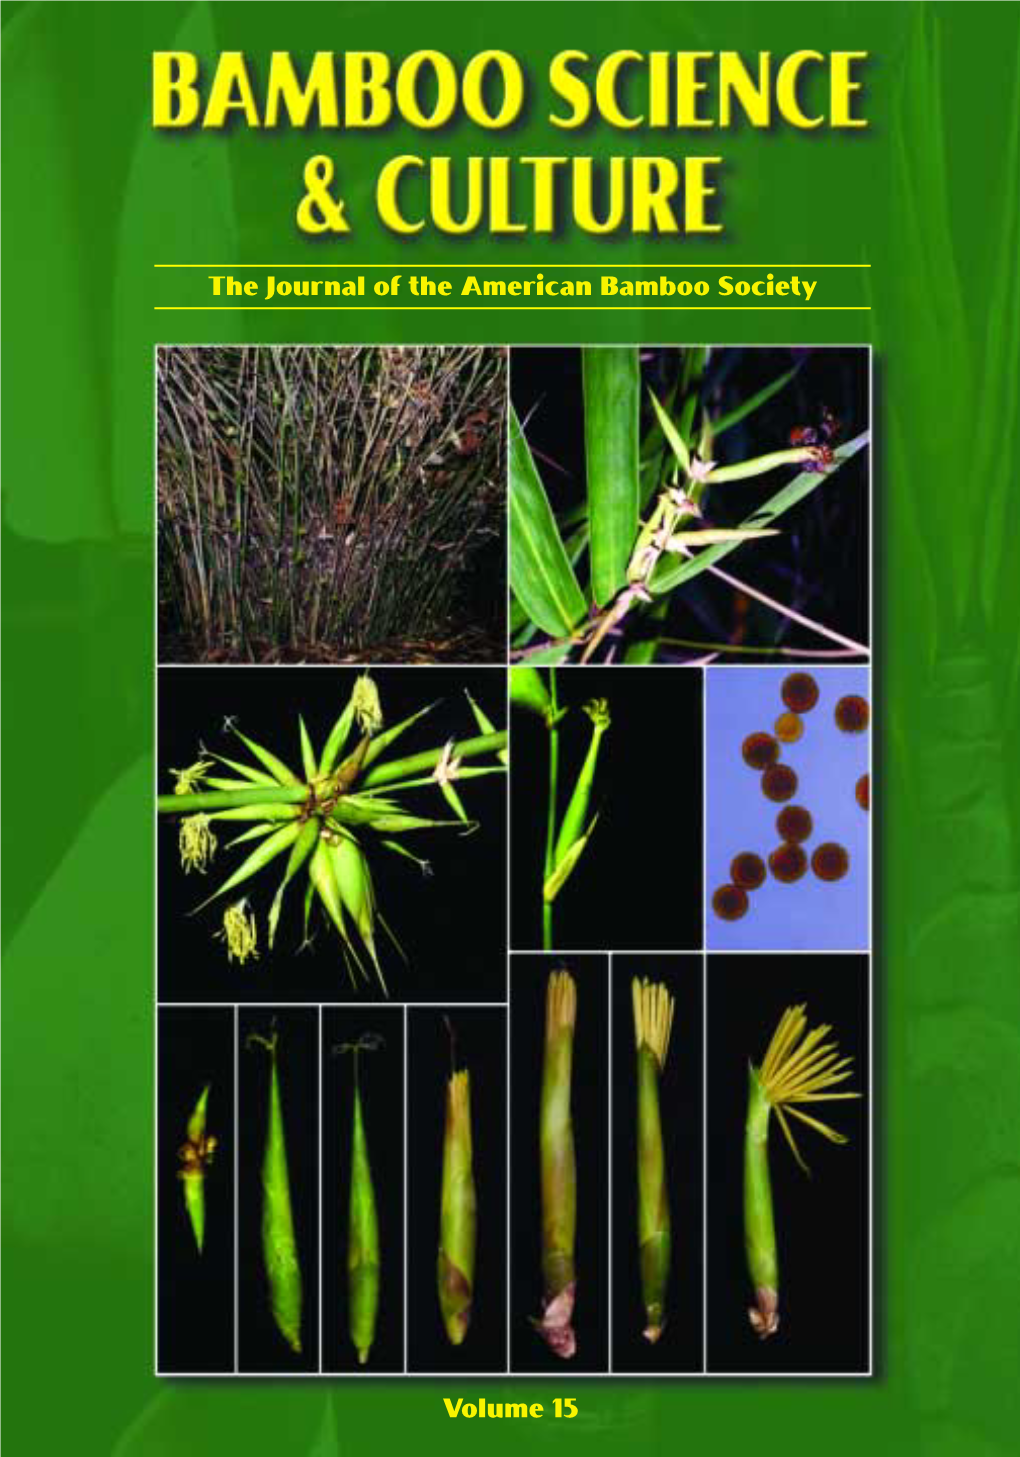 The Journal of the American Bamboo Society